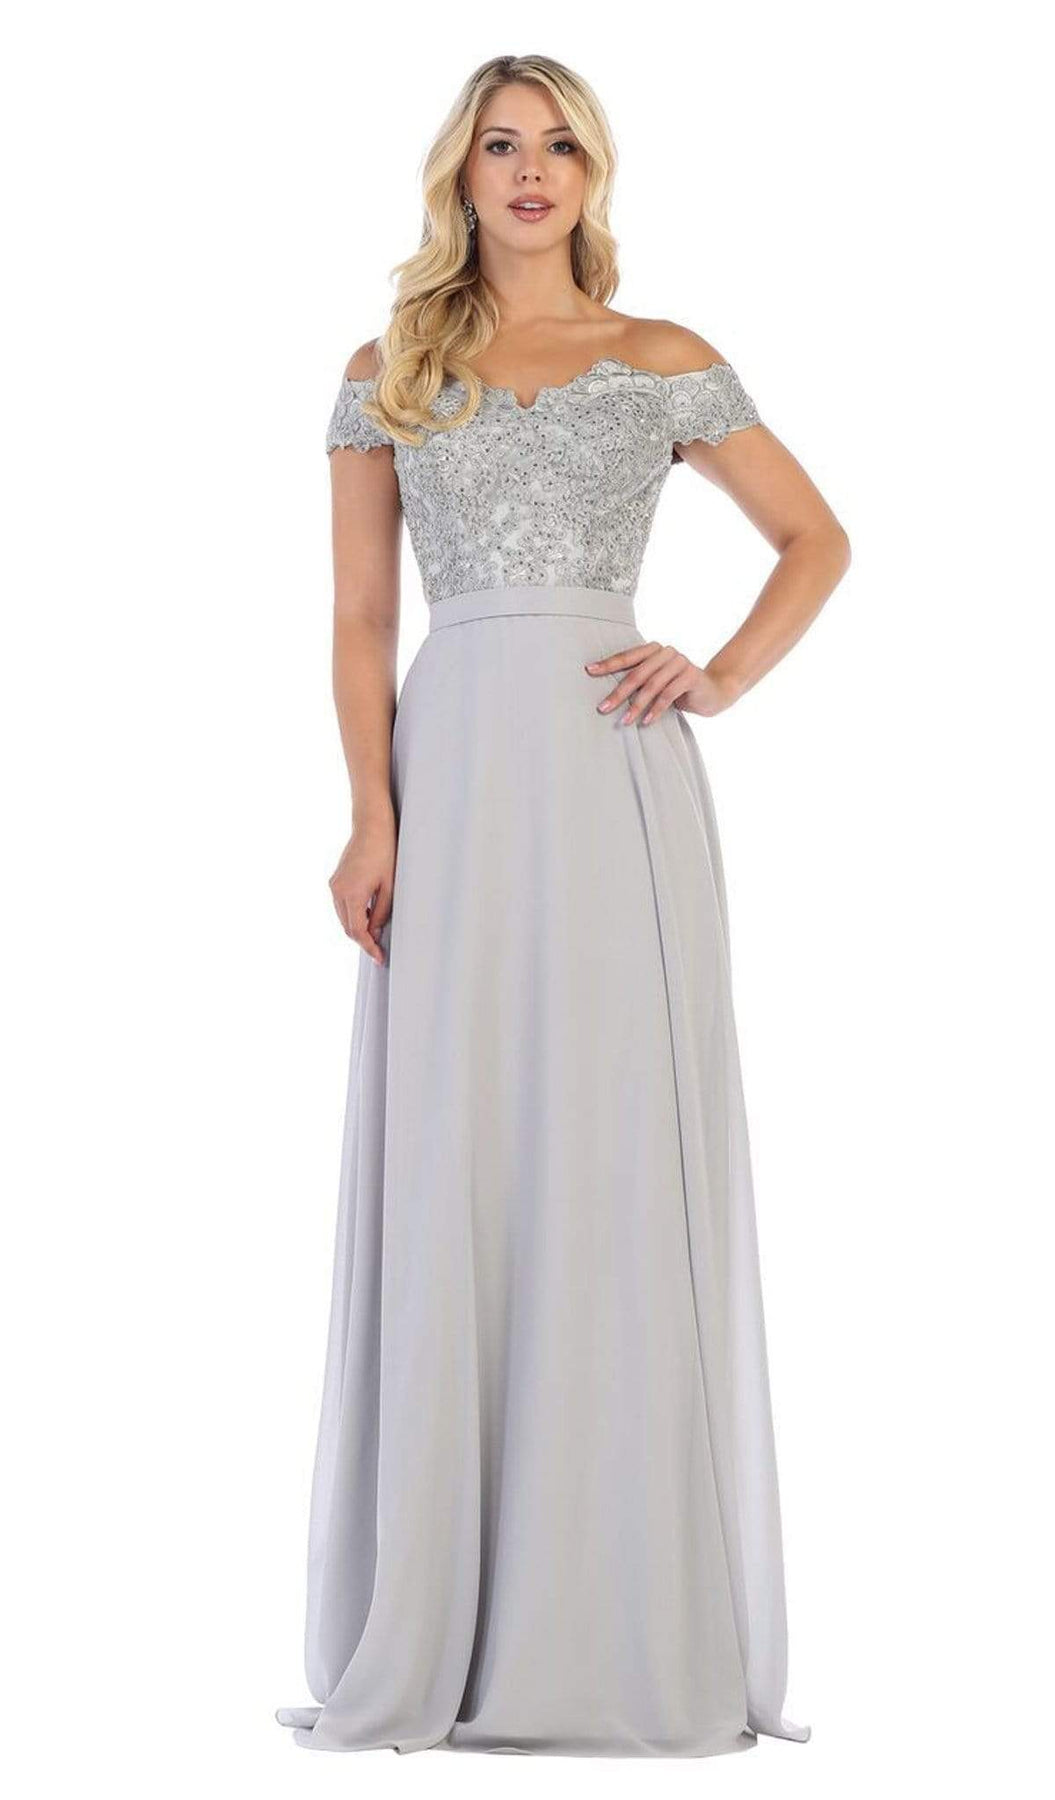 May Queen - MQ1601 Lace Appliqued Chiffon Off Shoulder Formal Gown Bridesmaid Dresses 4 / Silver